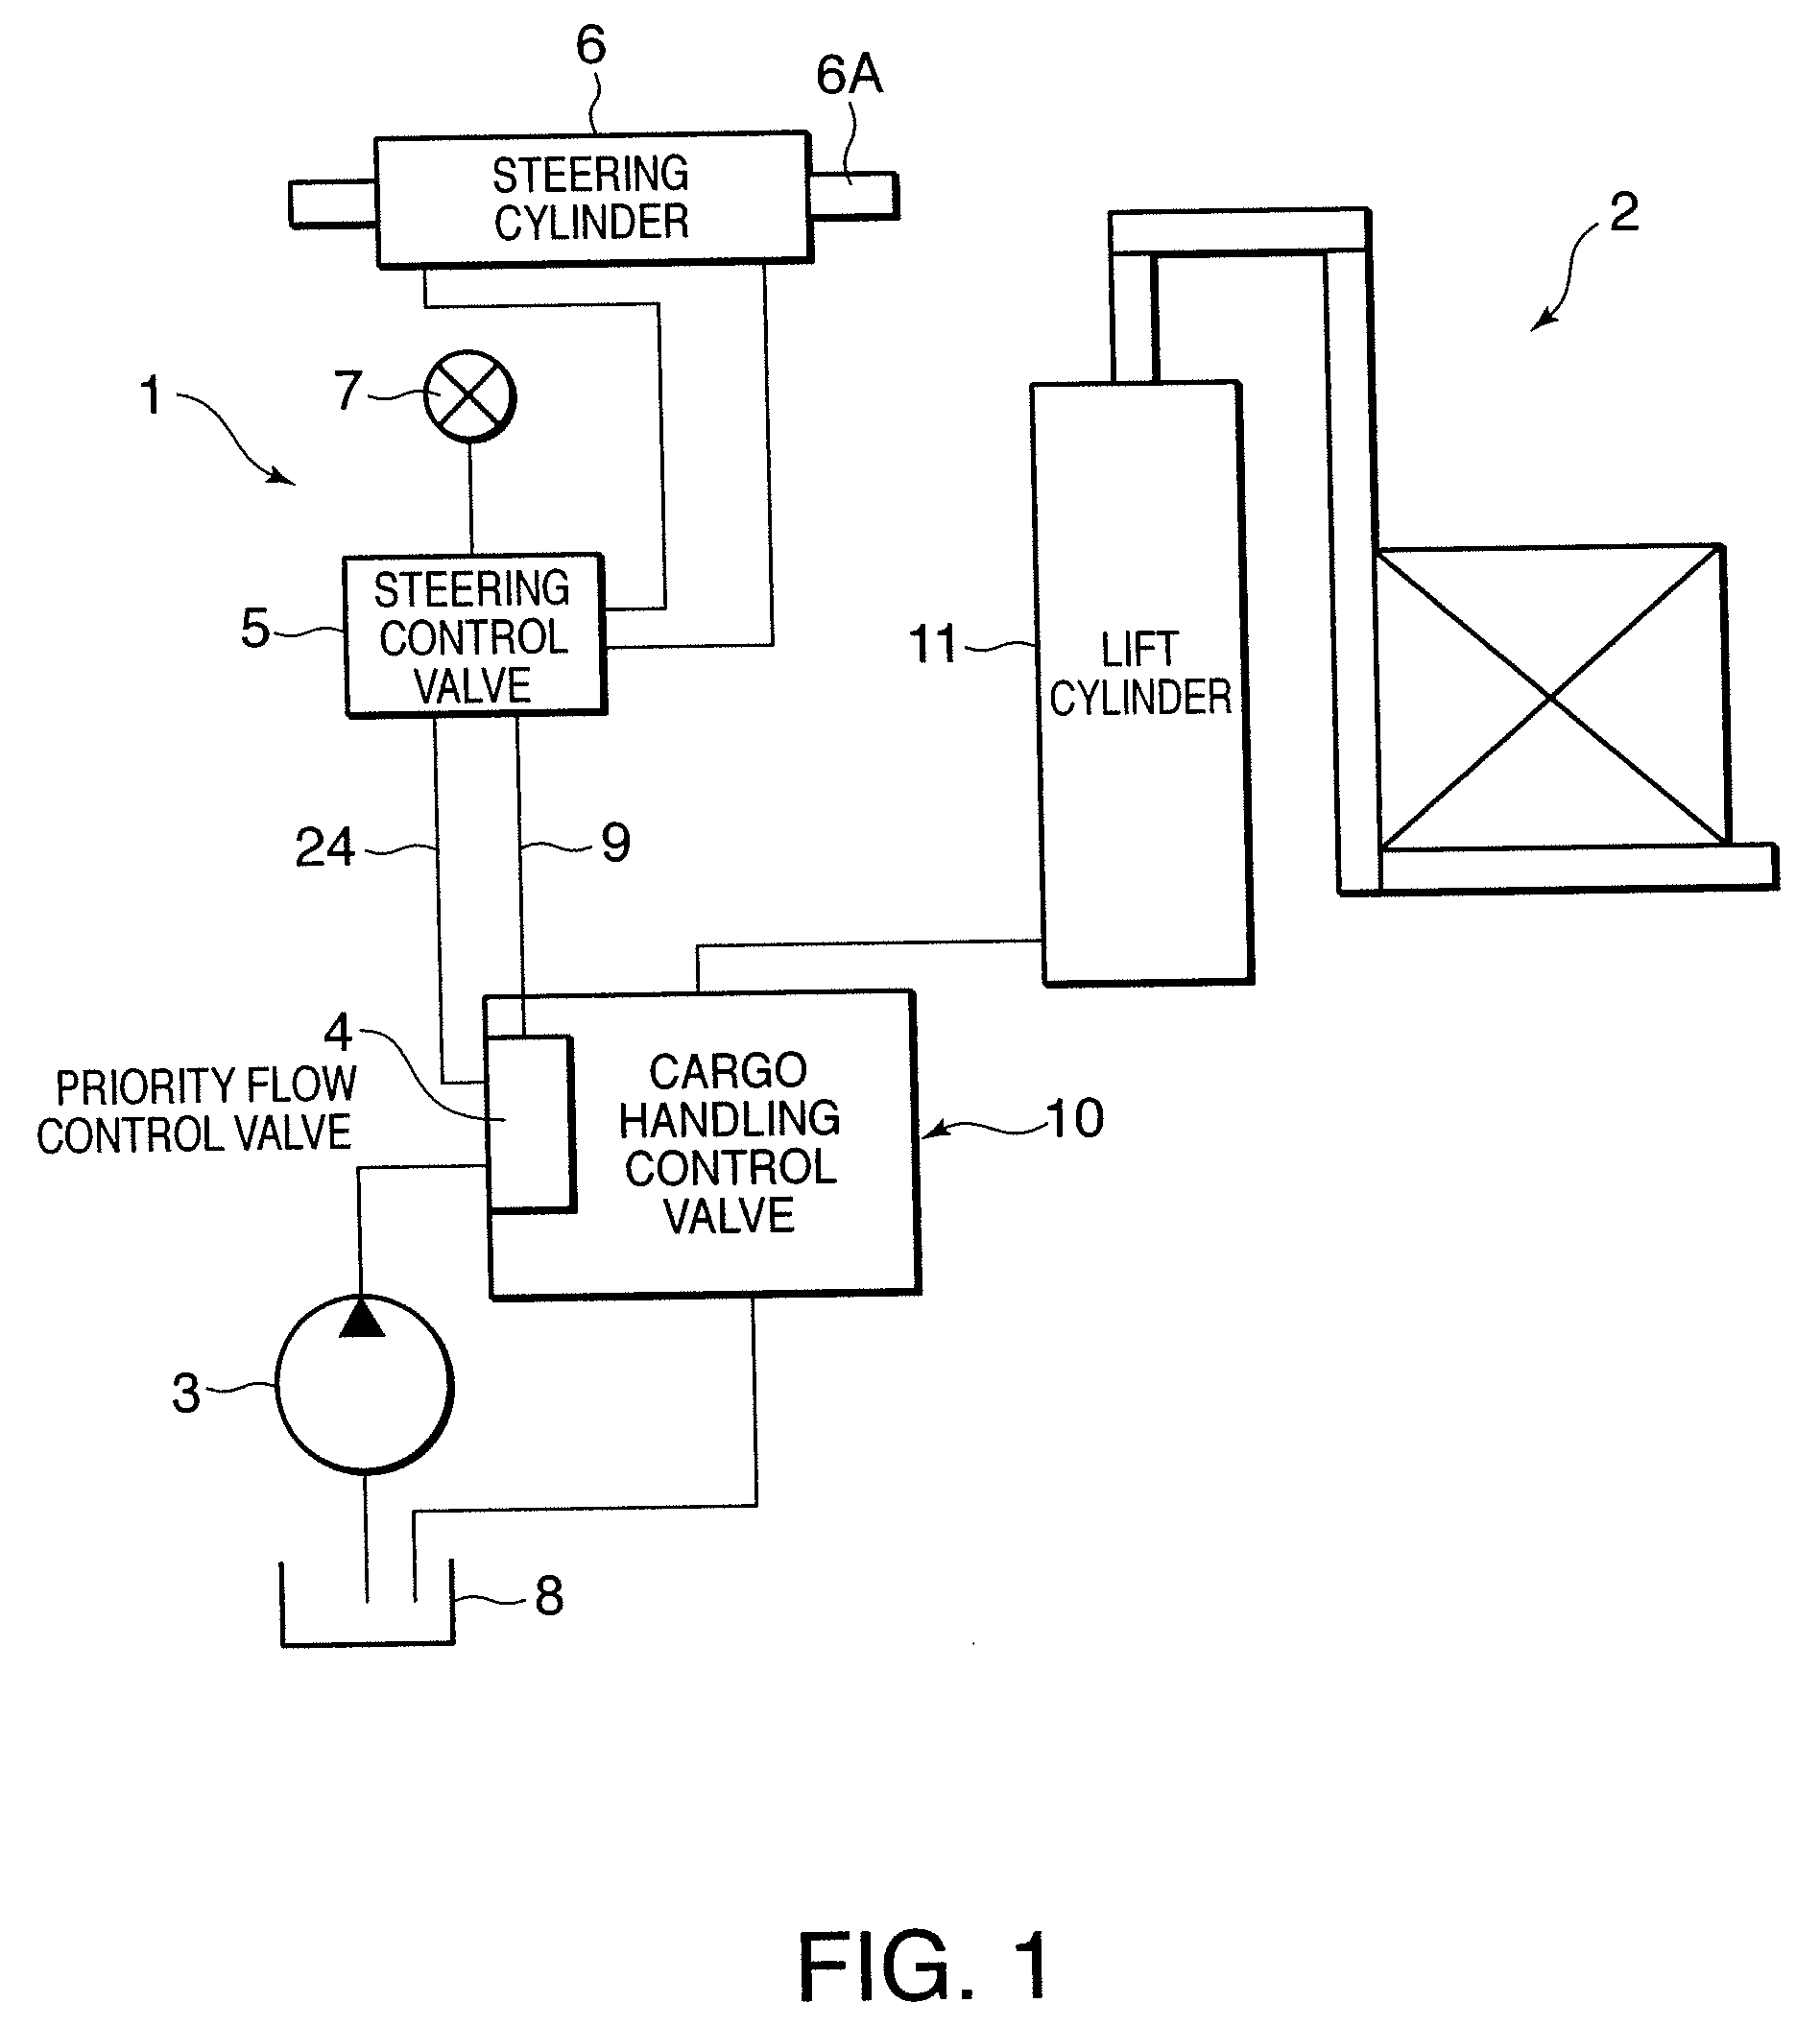 Oil pressure supply circuit for industrial vehicle